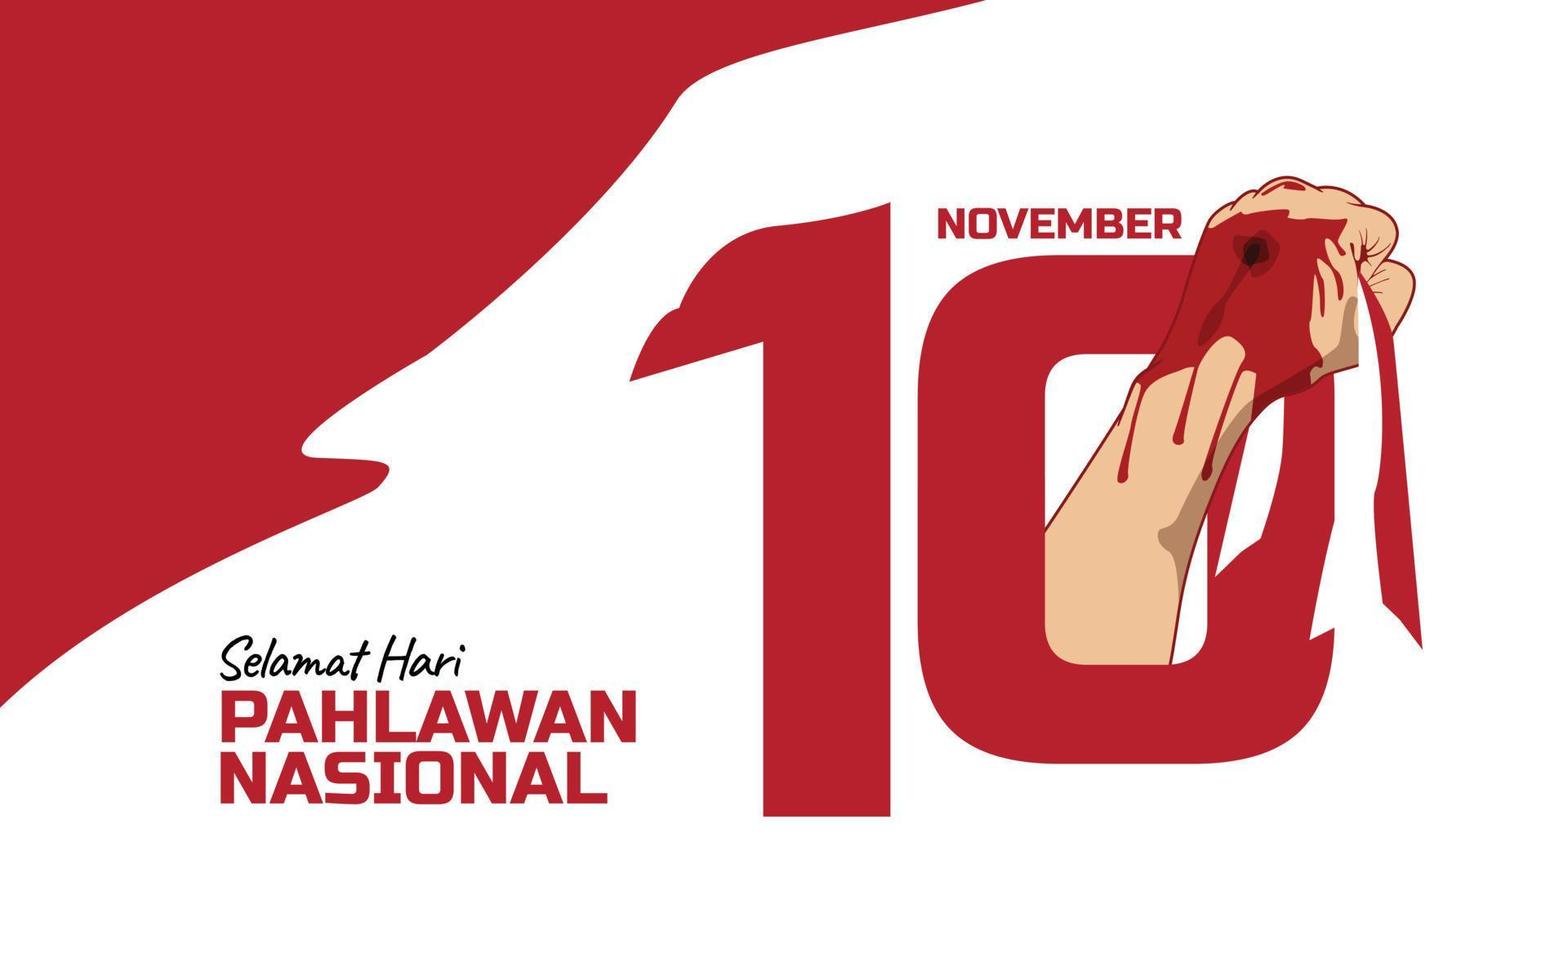 Hari pahlawan nasional holding the flag with injured and bleeding hands on 10 november with red and white flag vector